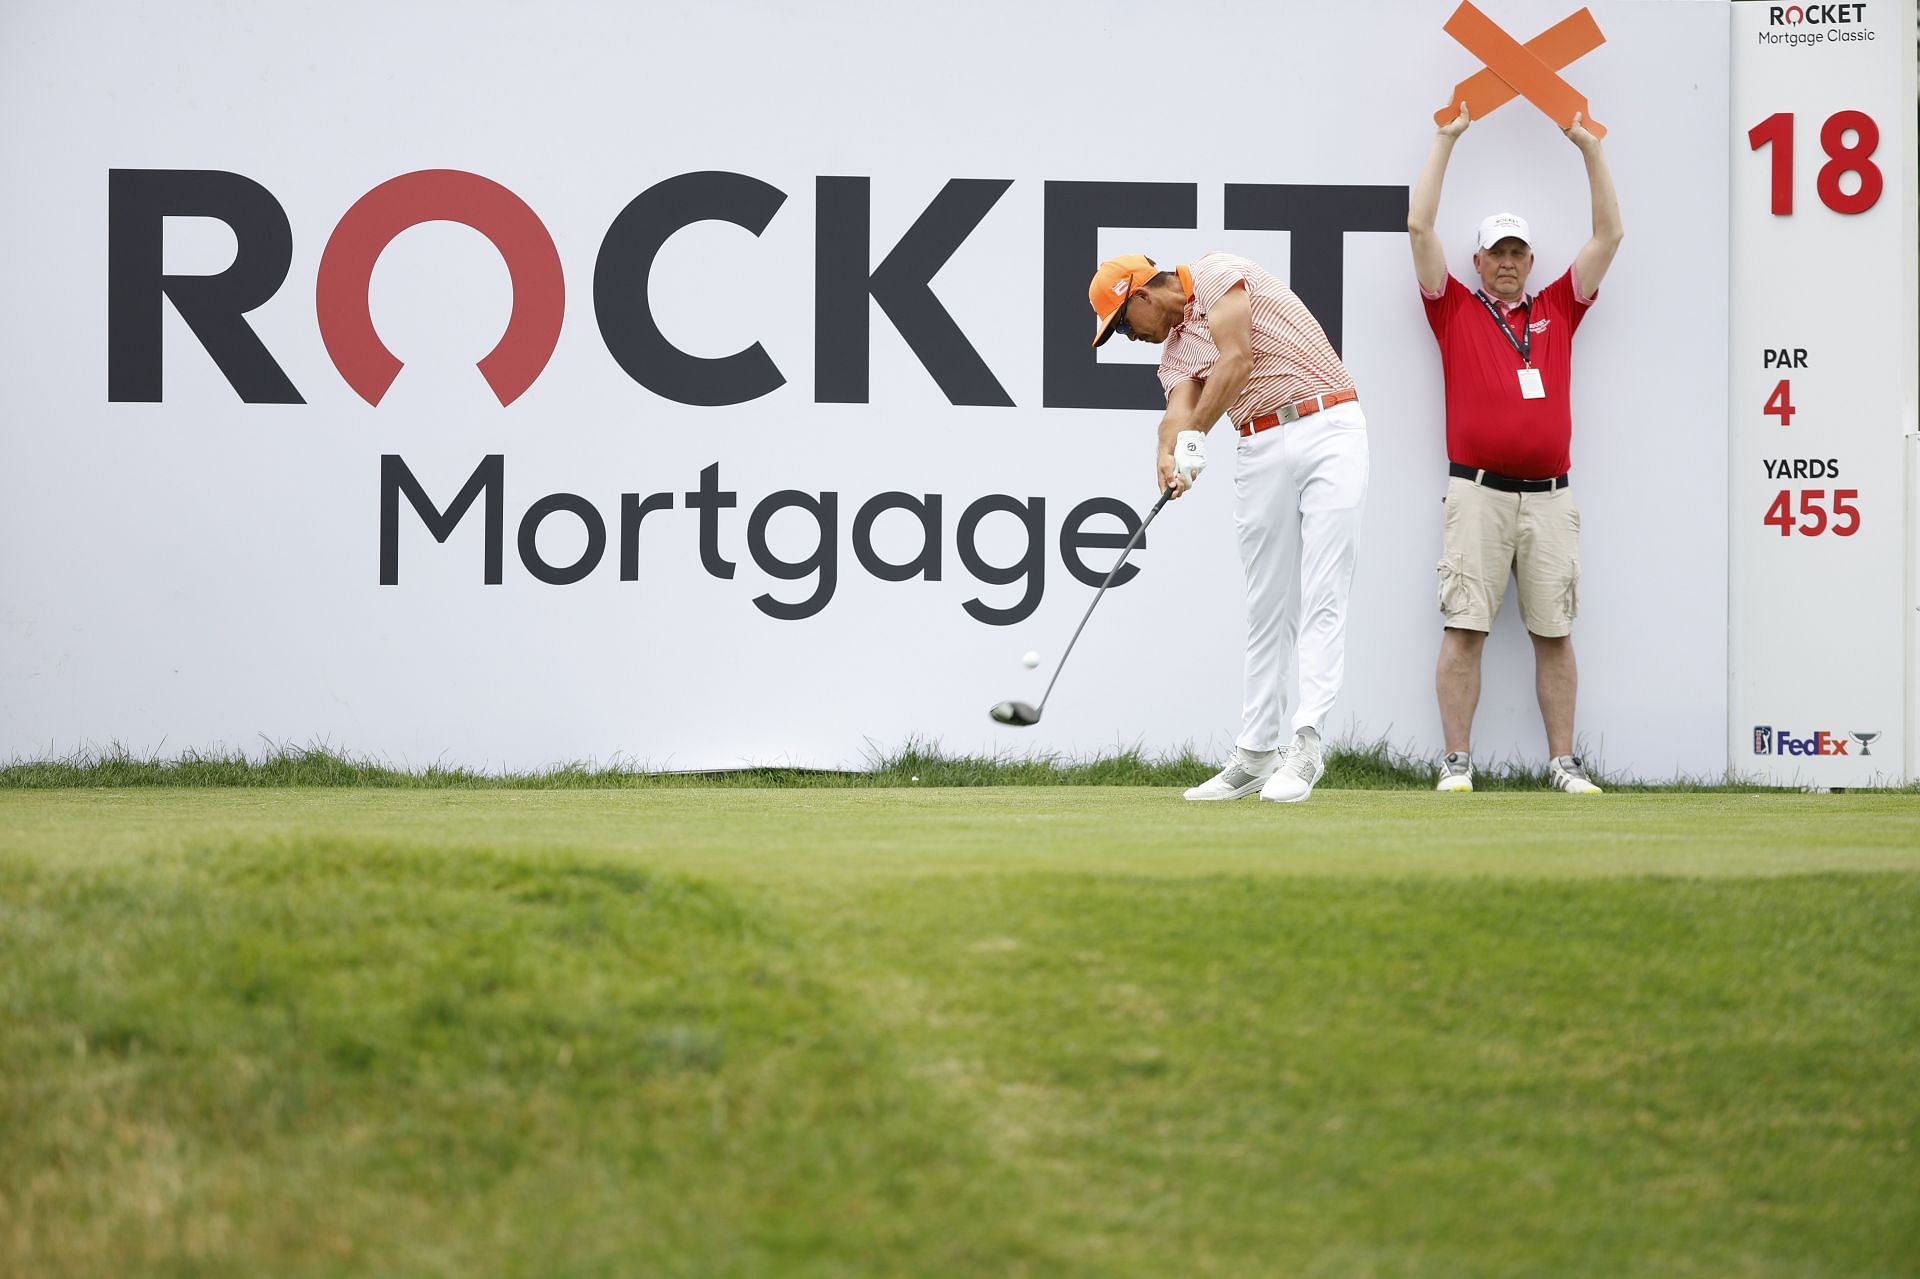 Rocket Mortgage Classic - Final Round